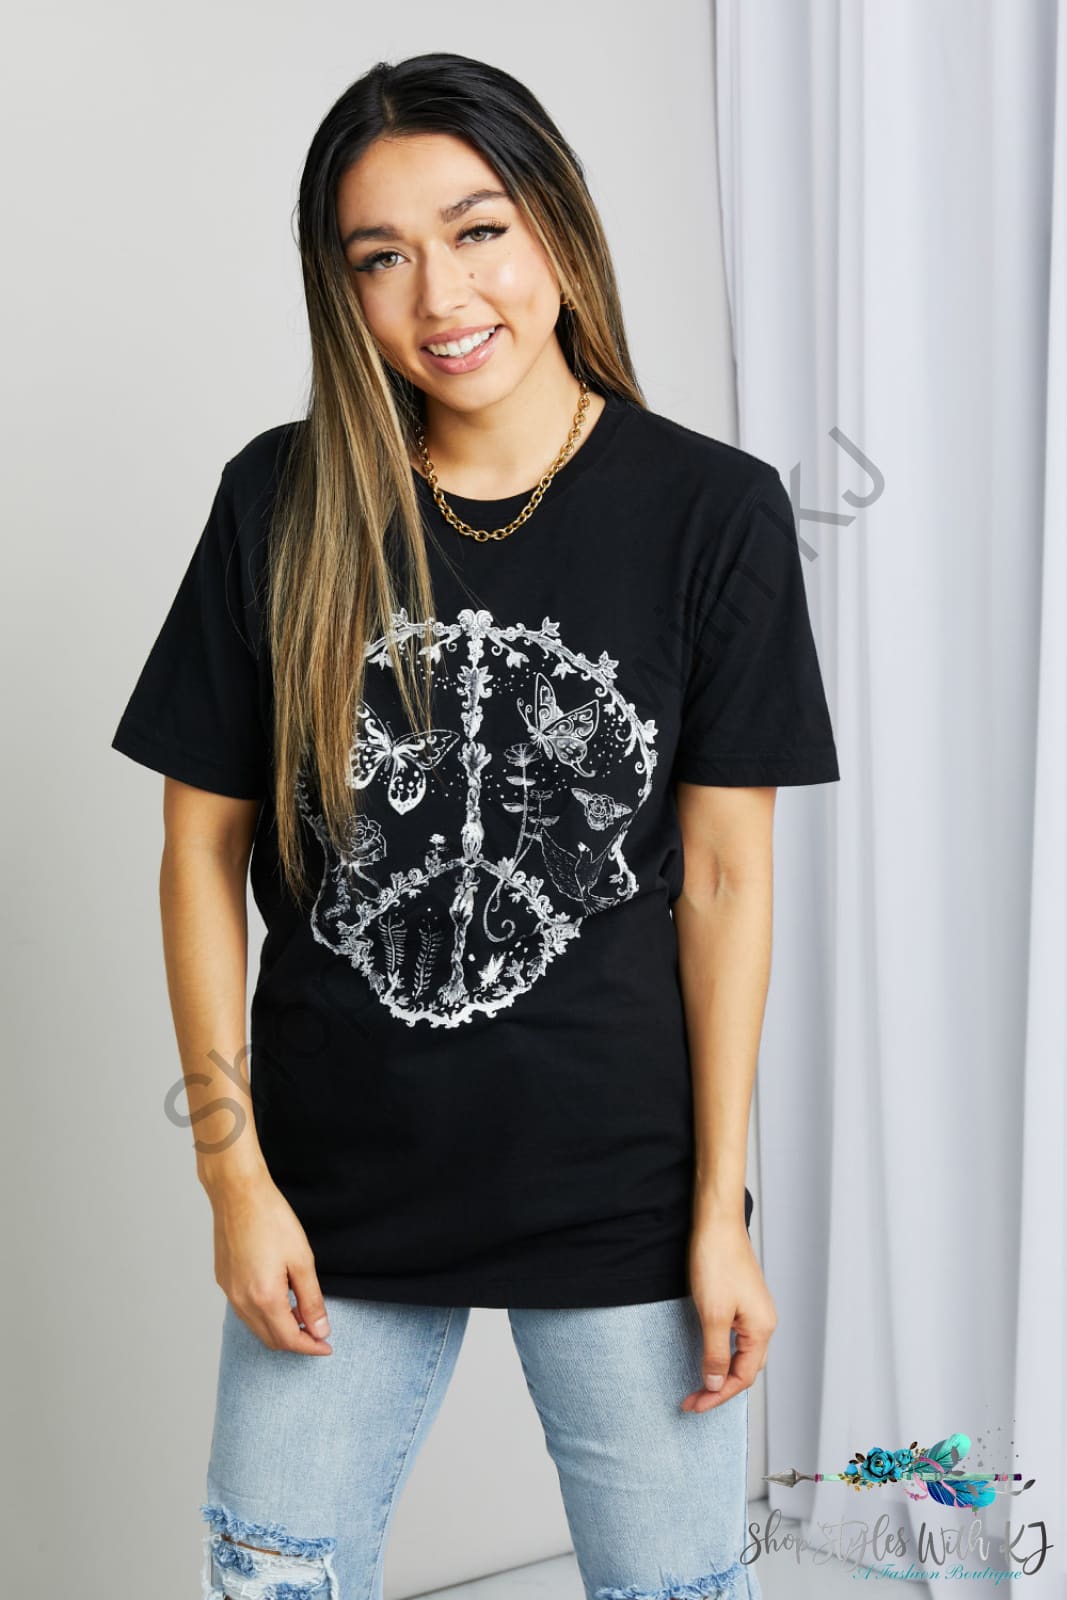 Butterfly Graphic Tee Shirt Black / S Shirts & Tops